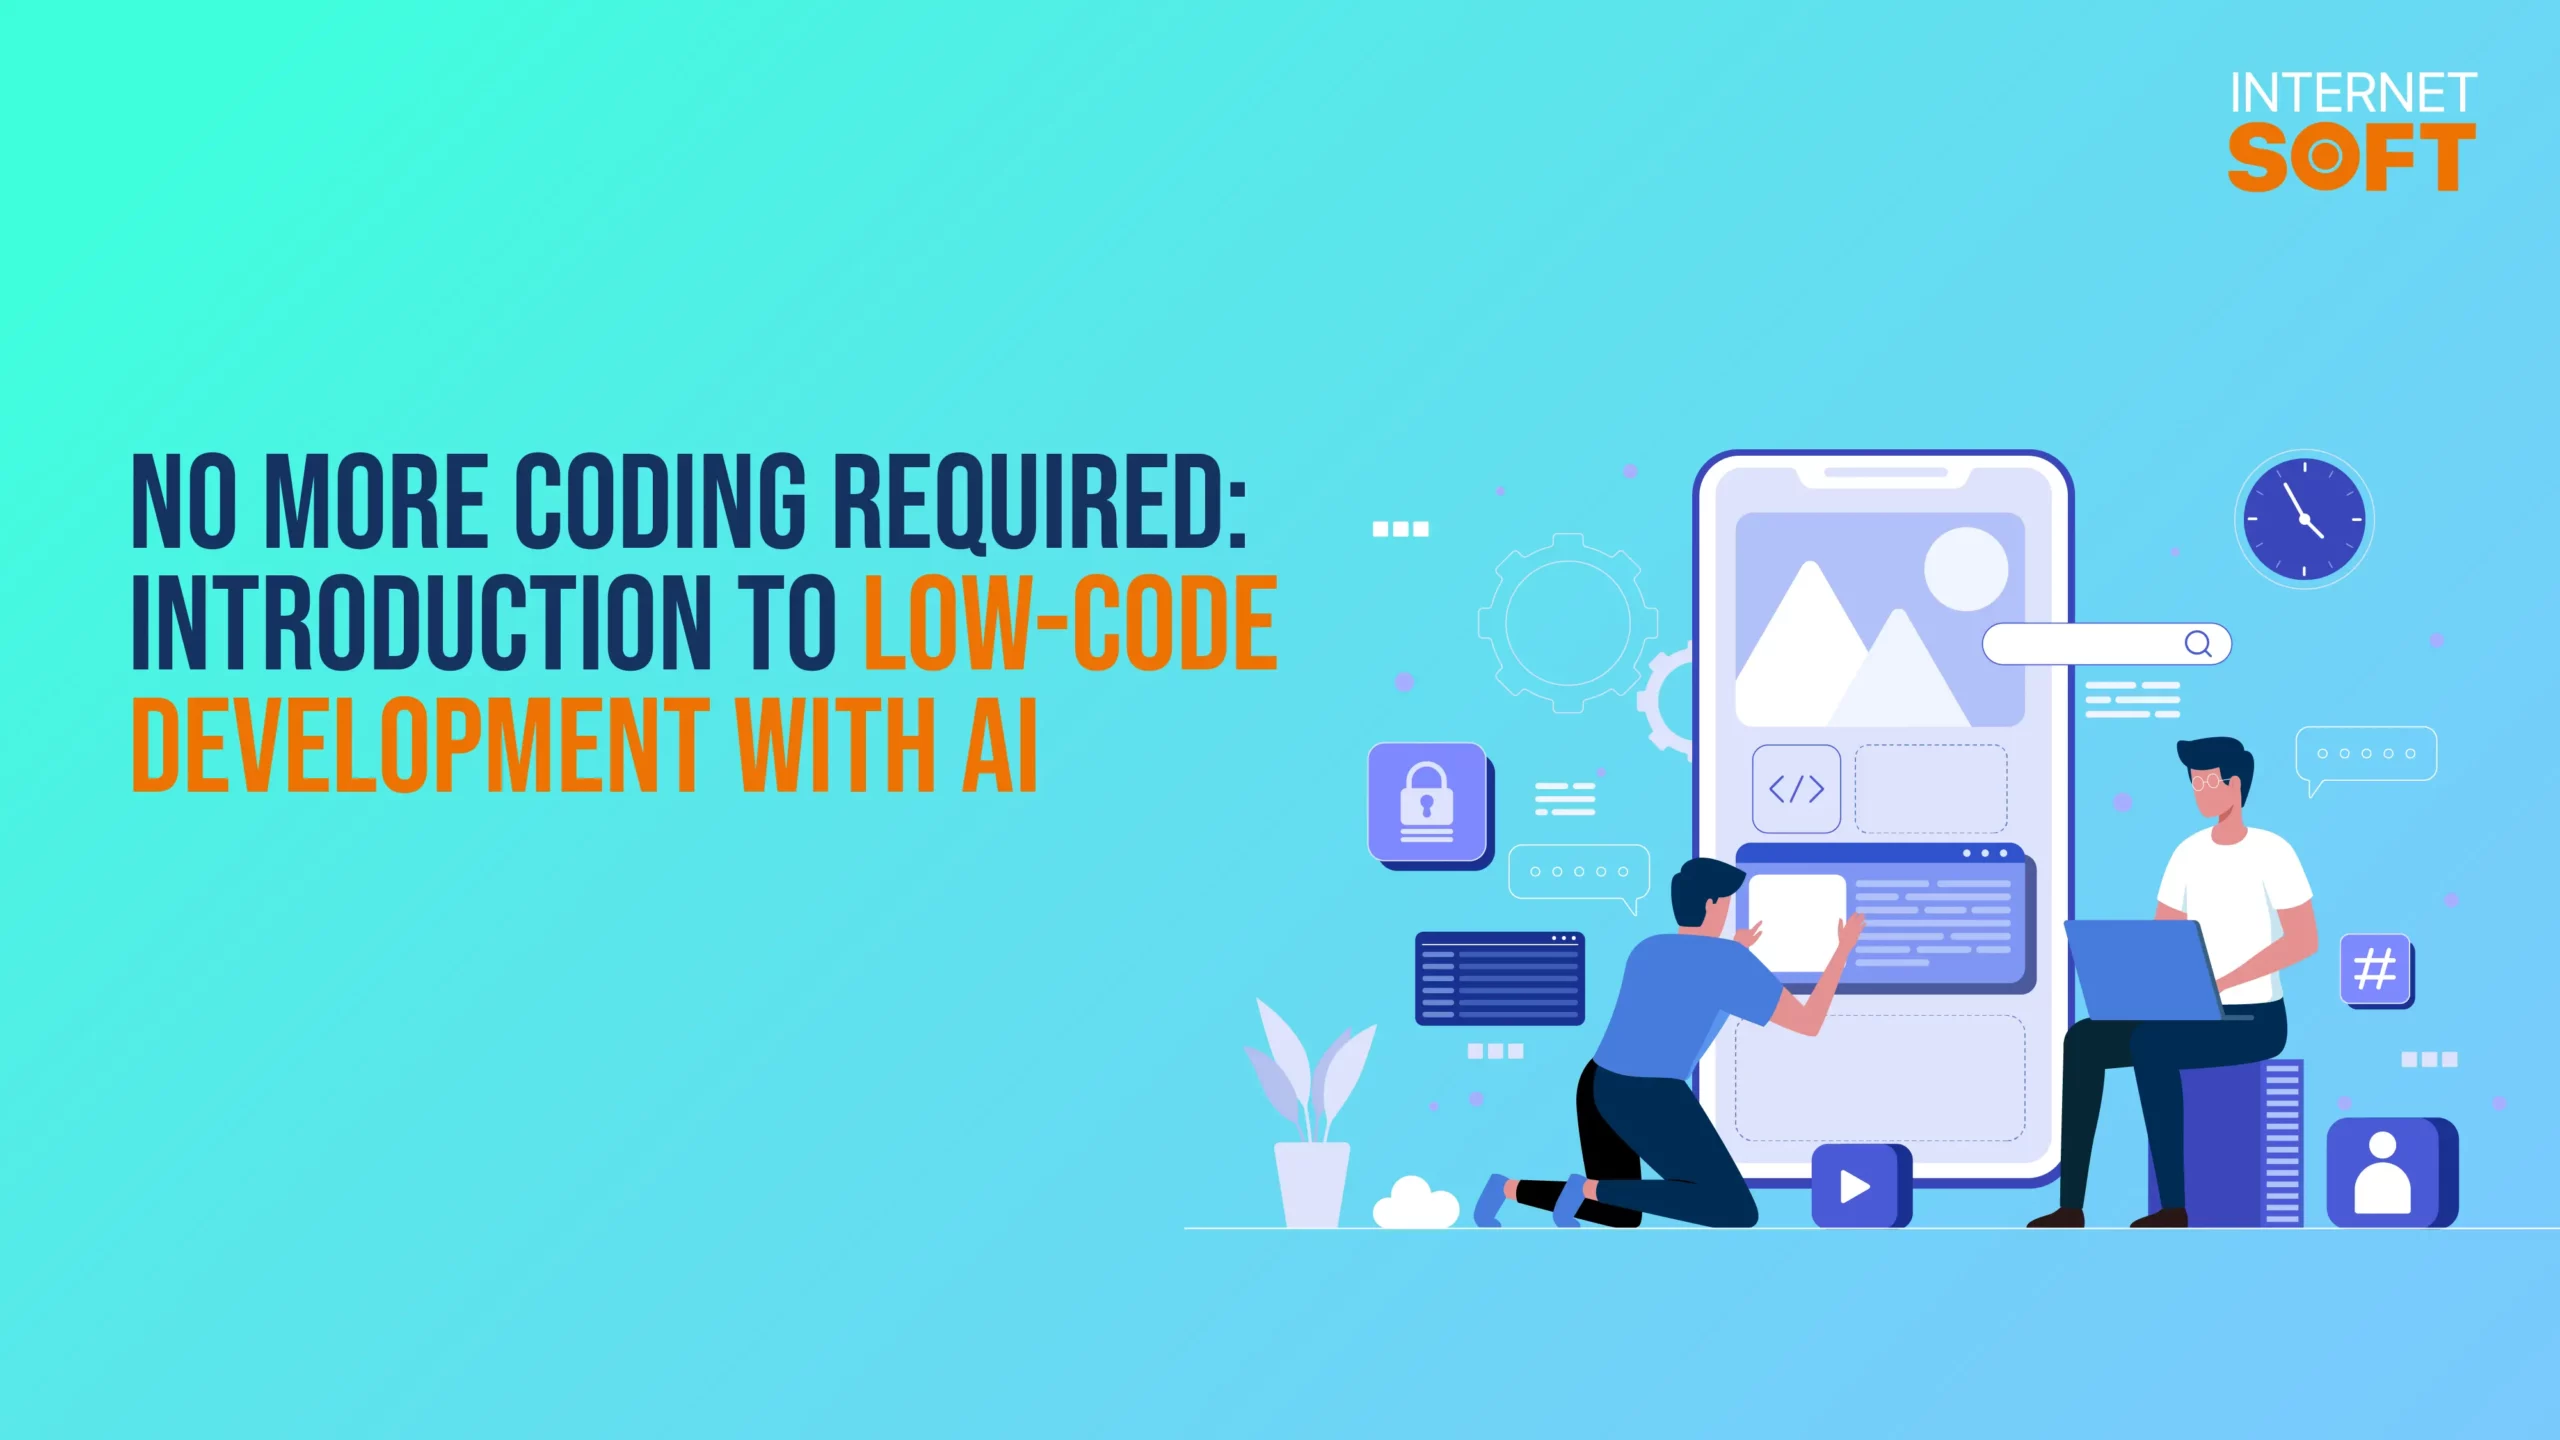 No More Coding Required Introduction to Low-Code Development with AI